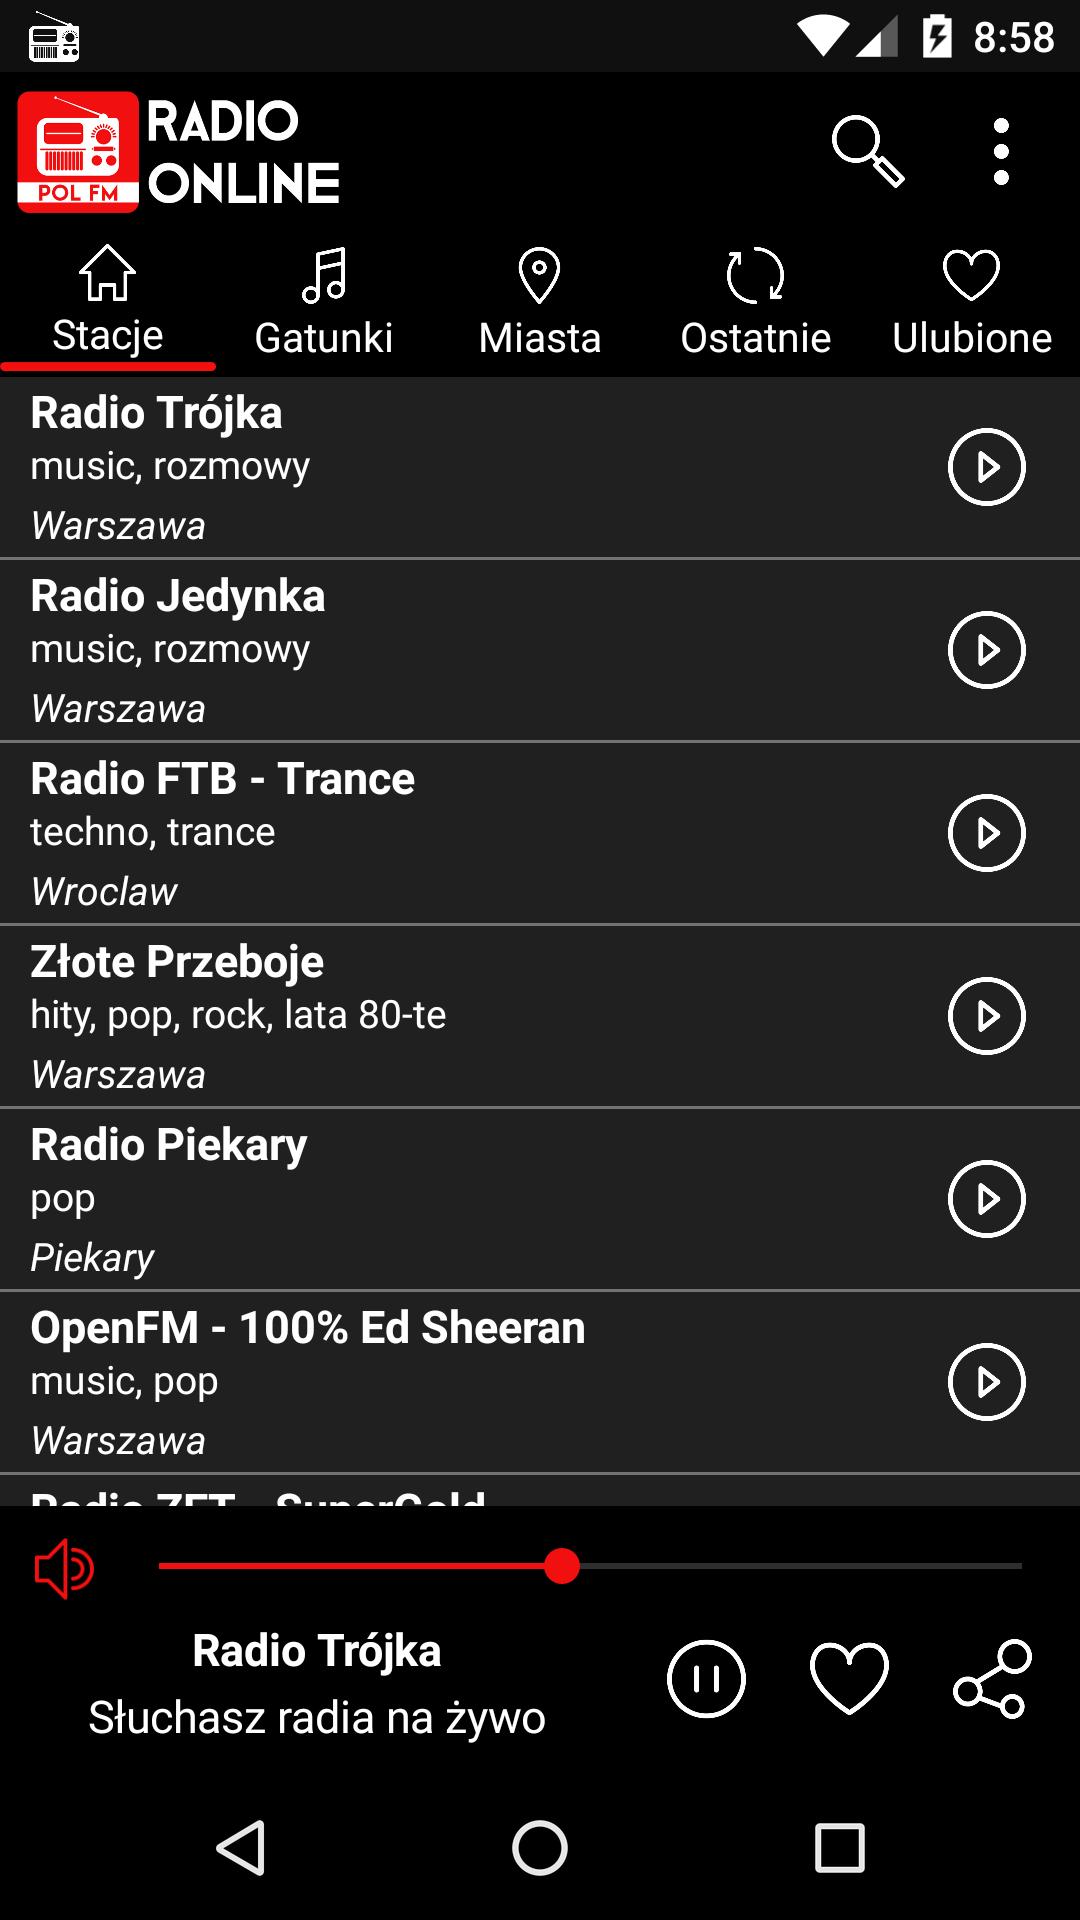 Radio Internetowe for Android - APK Download